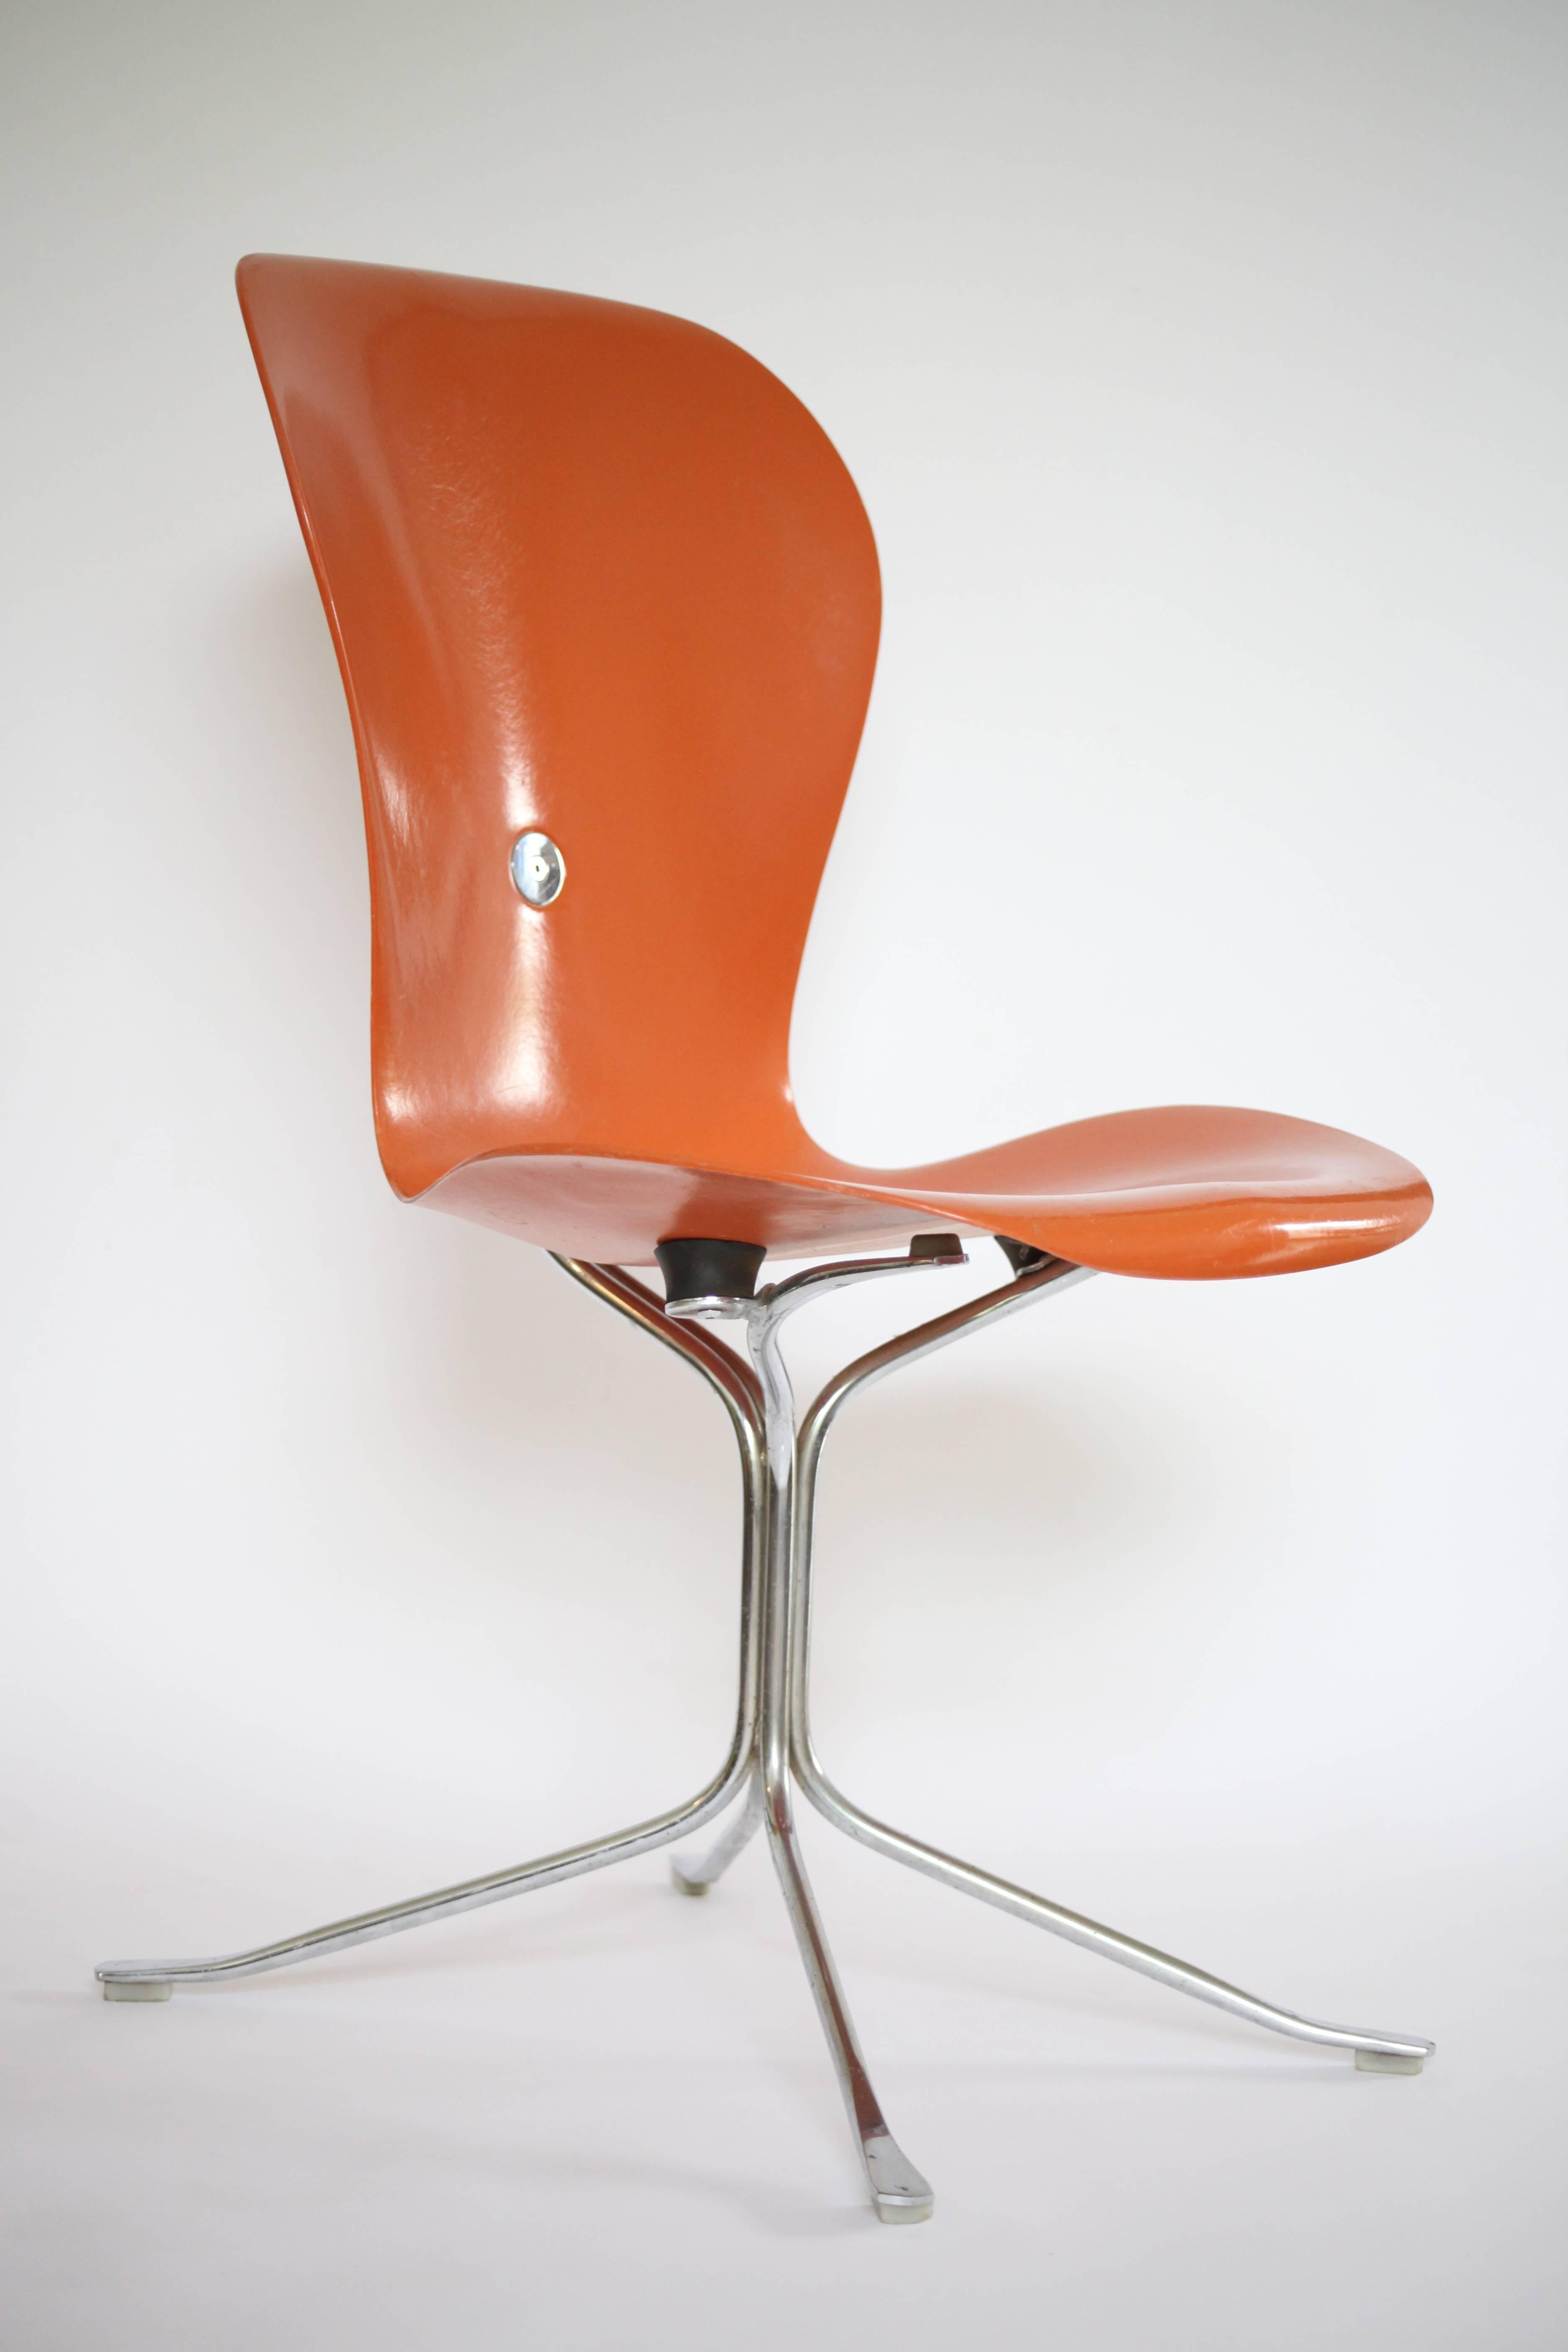 Vintage 1972 Ion chairs by Gideon Kramer for American Desk Manufacturing. Fantastic sculptural seating.